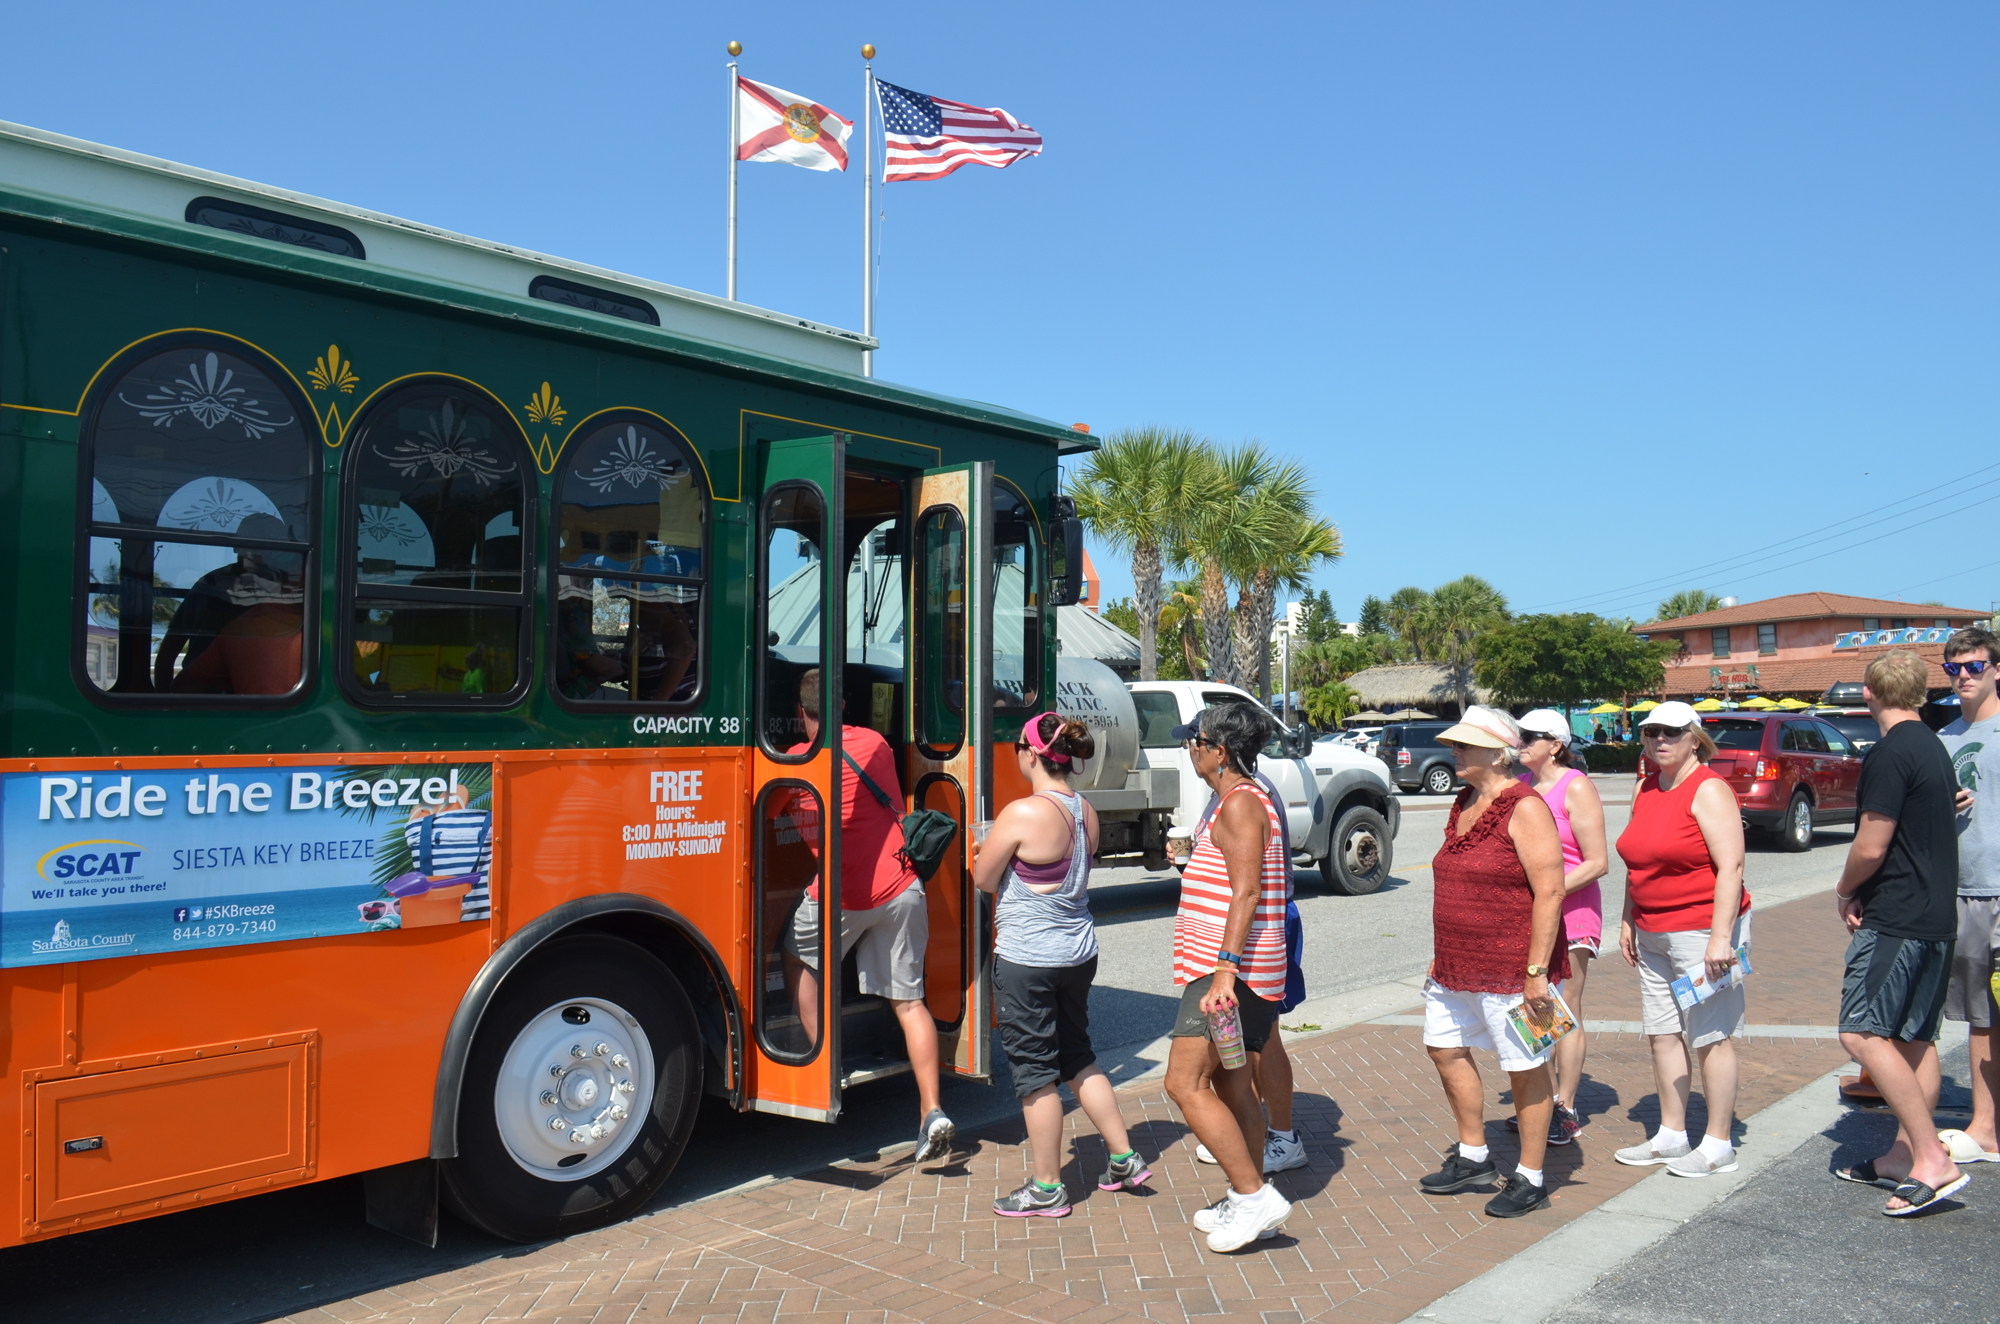 The Sarasota in Motion project team cited the Siesta Key Breeze trolley as a potential model the city could emulate as it considers options for public transit improvements.